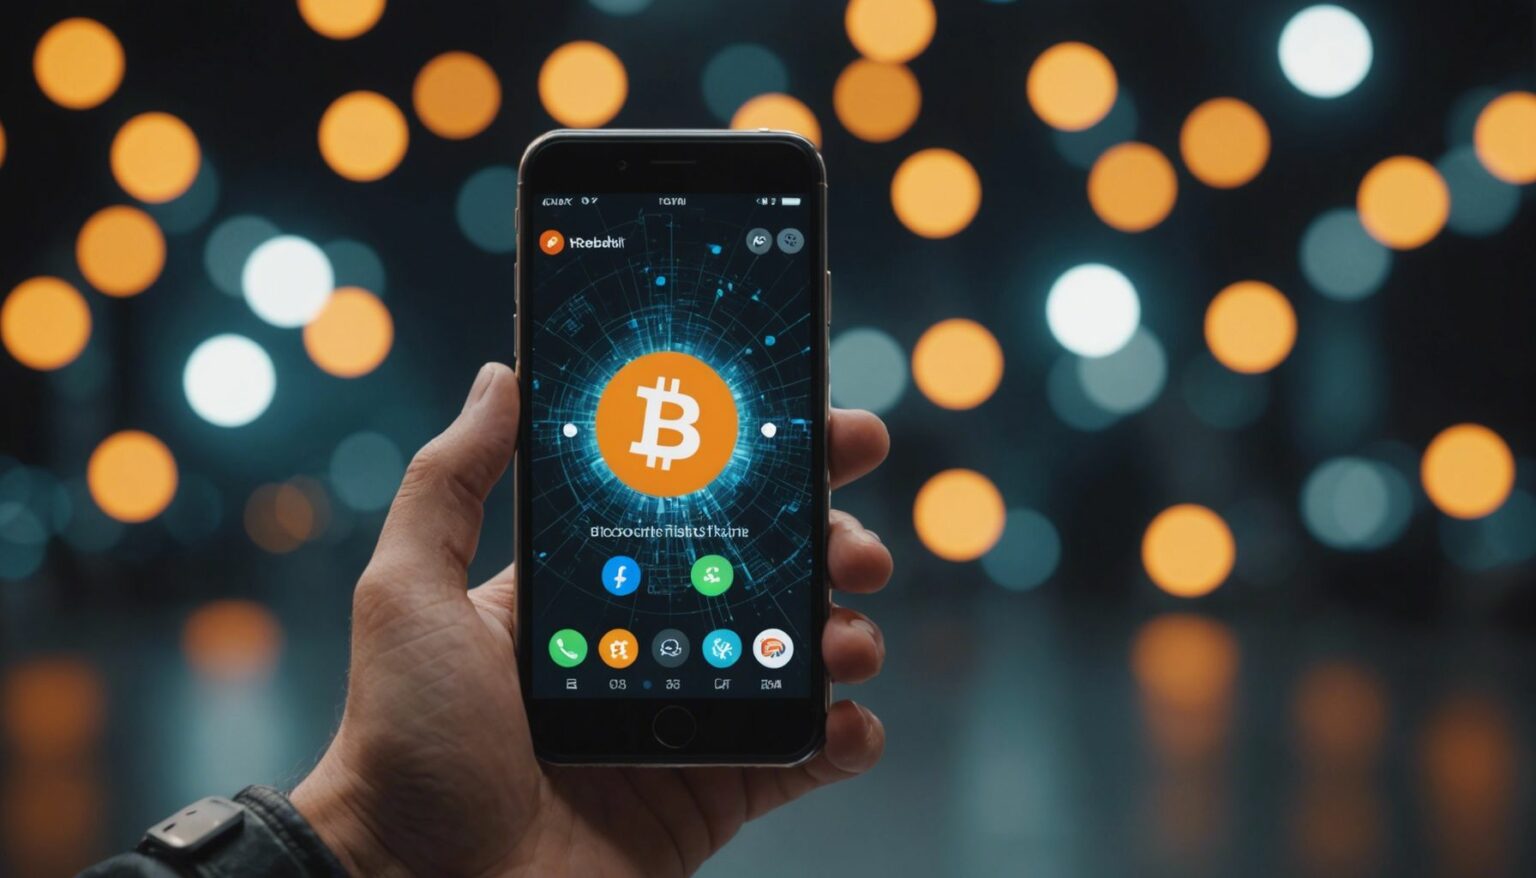 Person holding smartphone with Reddit logo and cryptocurrency symbols like Bitcoin and Ethereum floating around.